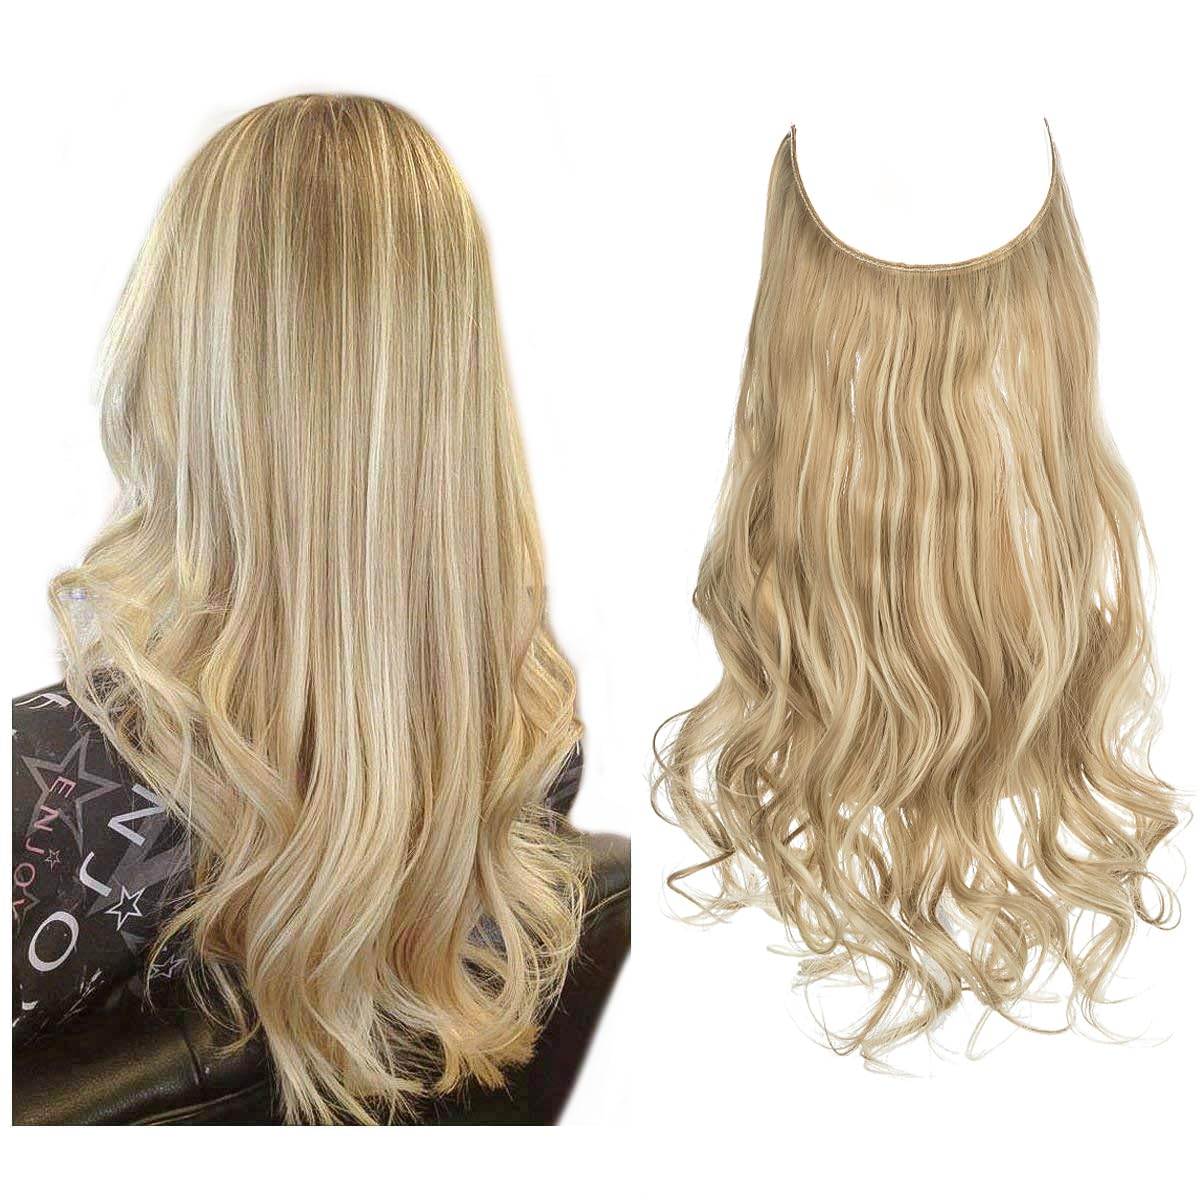 SARLA Hair Extensions Invisible Wire Dirty Blonde Highlight Wavy Curly Synthetic Hairpieces Balayage for Women Long 18 Inch Adjustable Headband No Clip